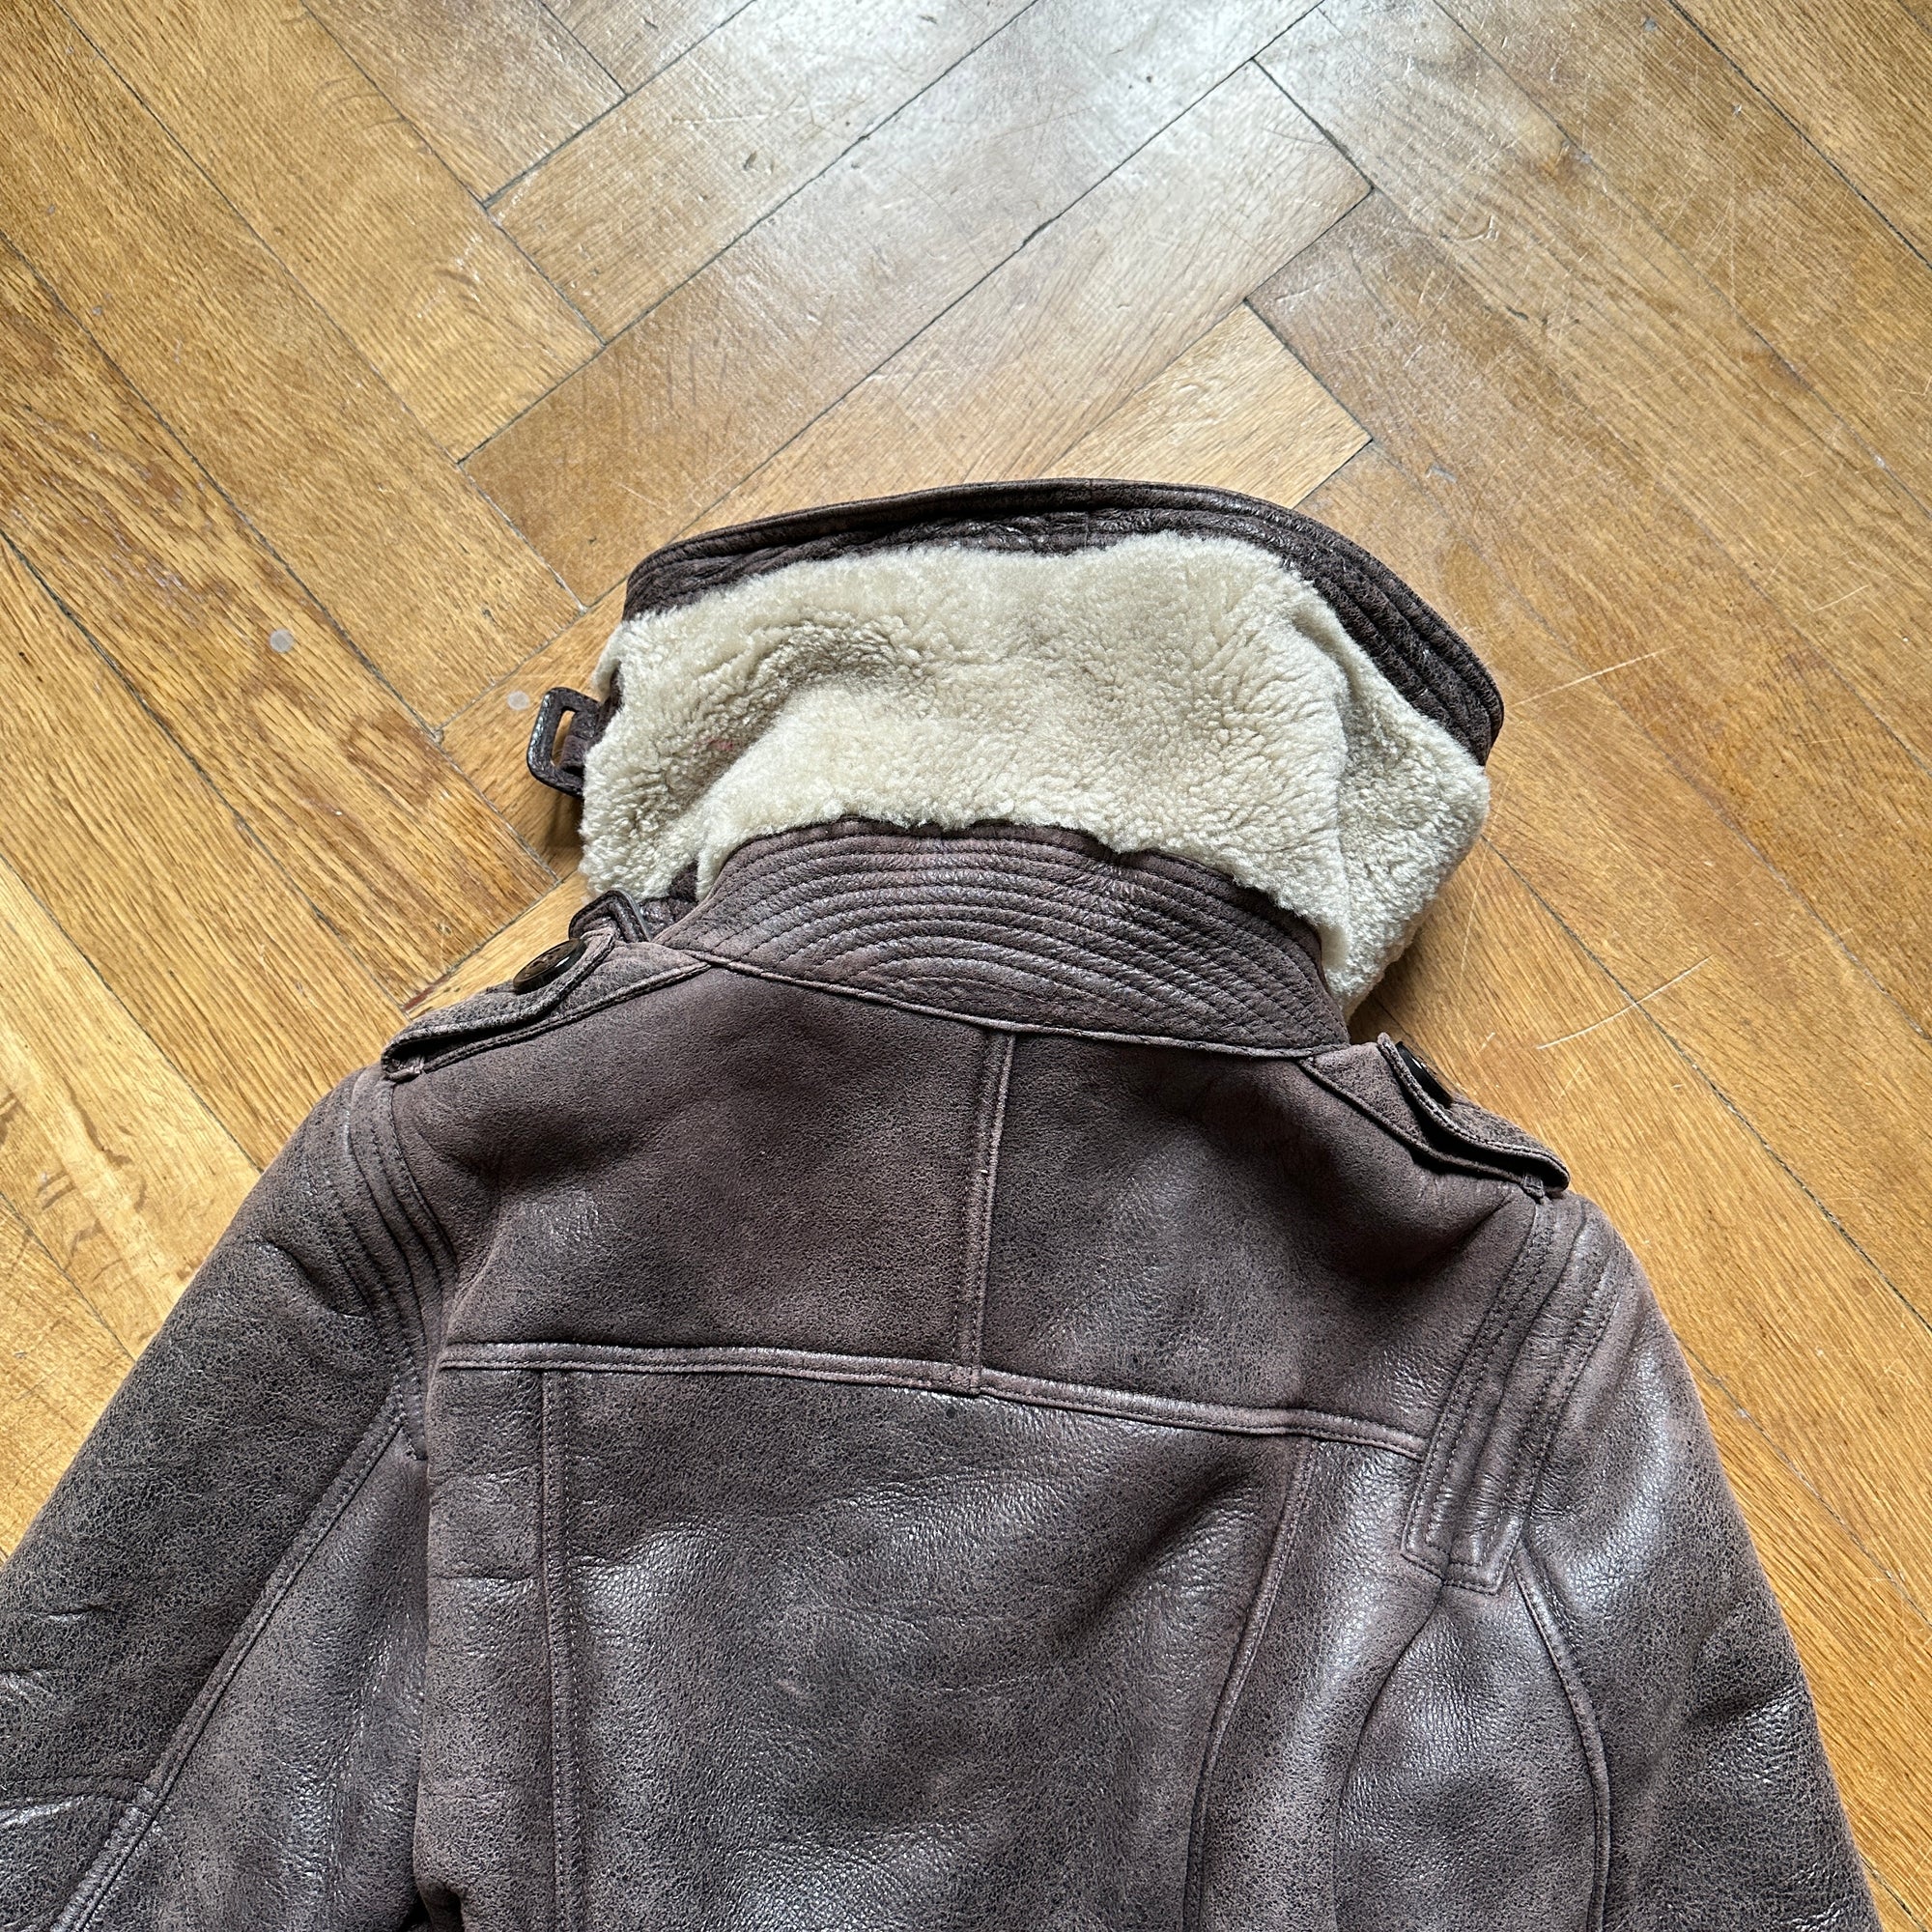 Burberry Prorsum FW10 Shearling Leather Aviator Cropped Jacket